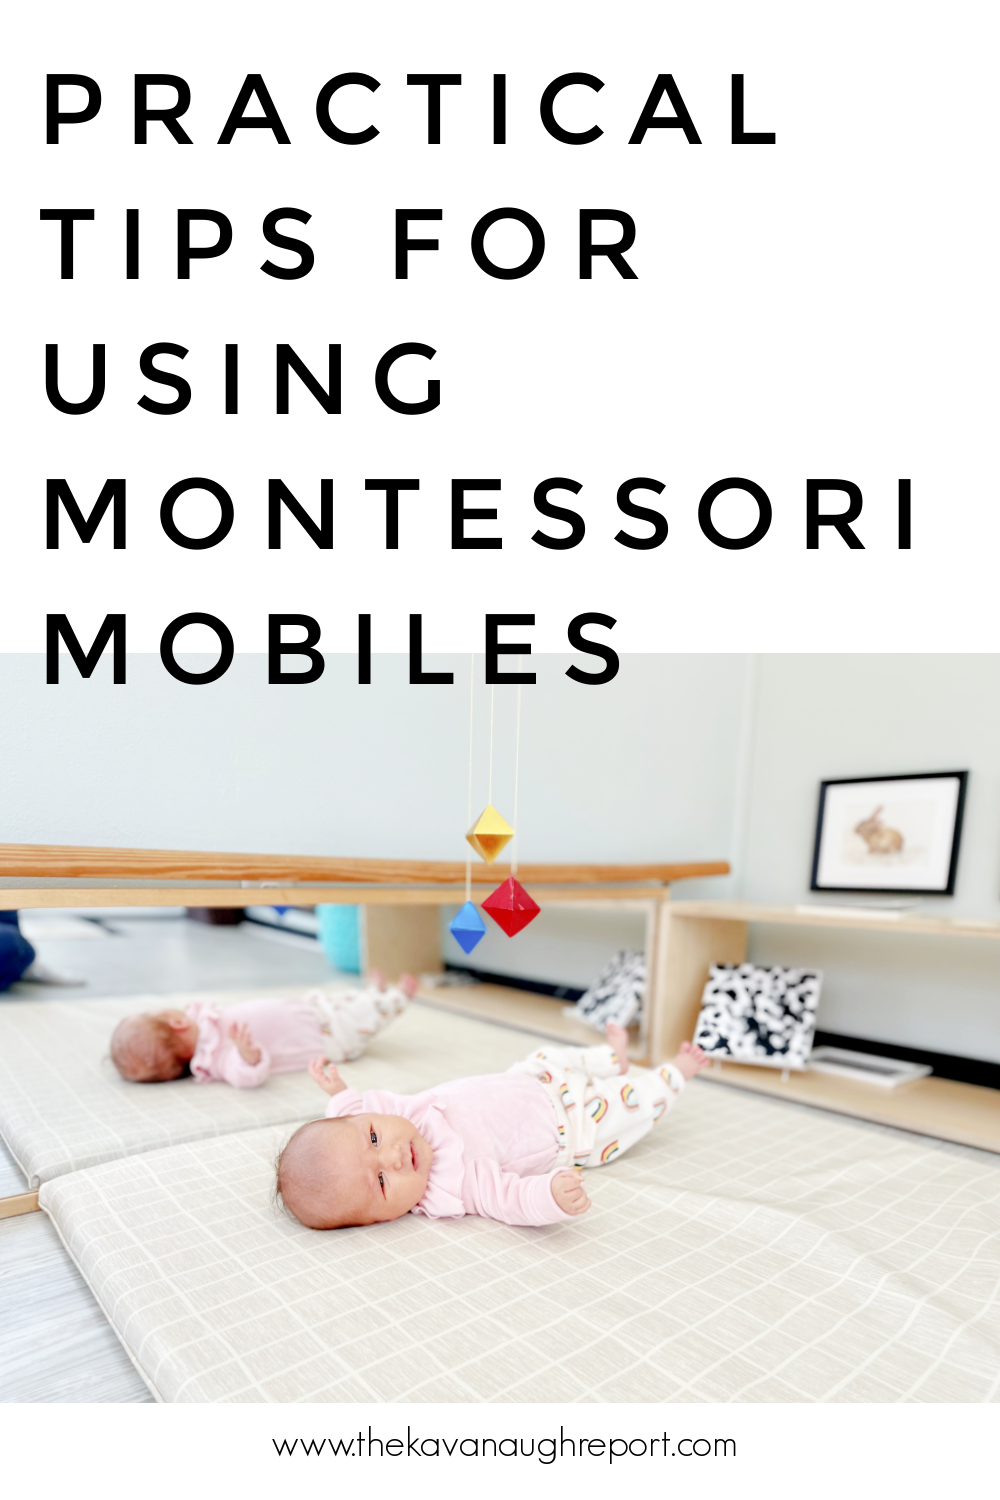 Practical tips for using and changing a Montessori mobile with your newborn. This series of Montessori baby mobiles engages baby's development